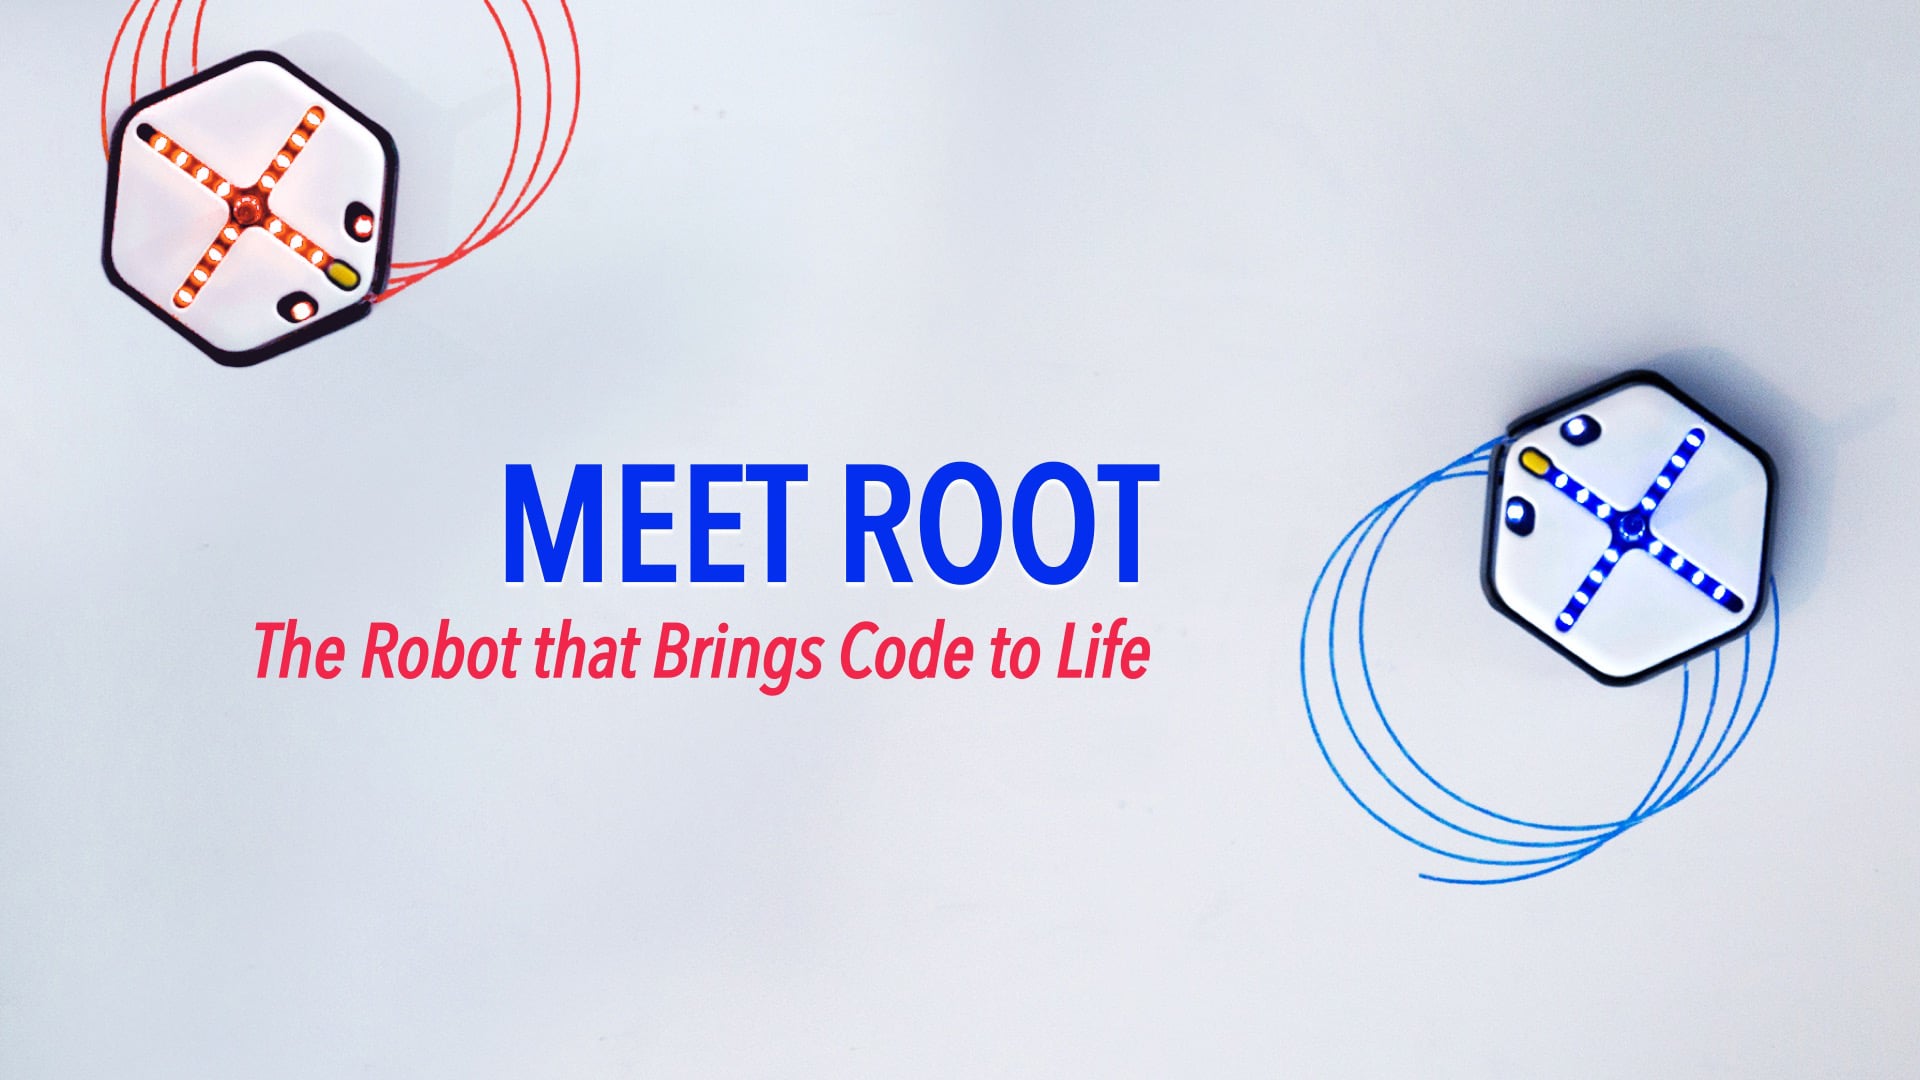 Meet Root: The Robot that Brings Code to Life